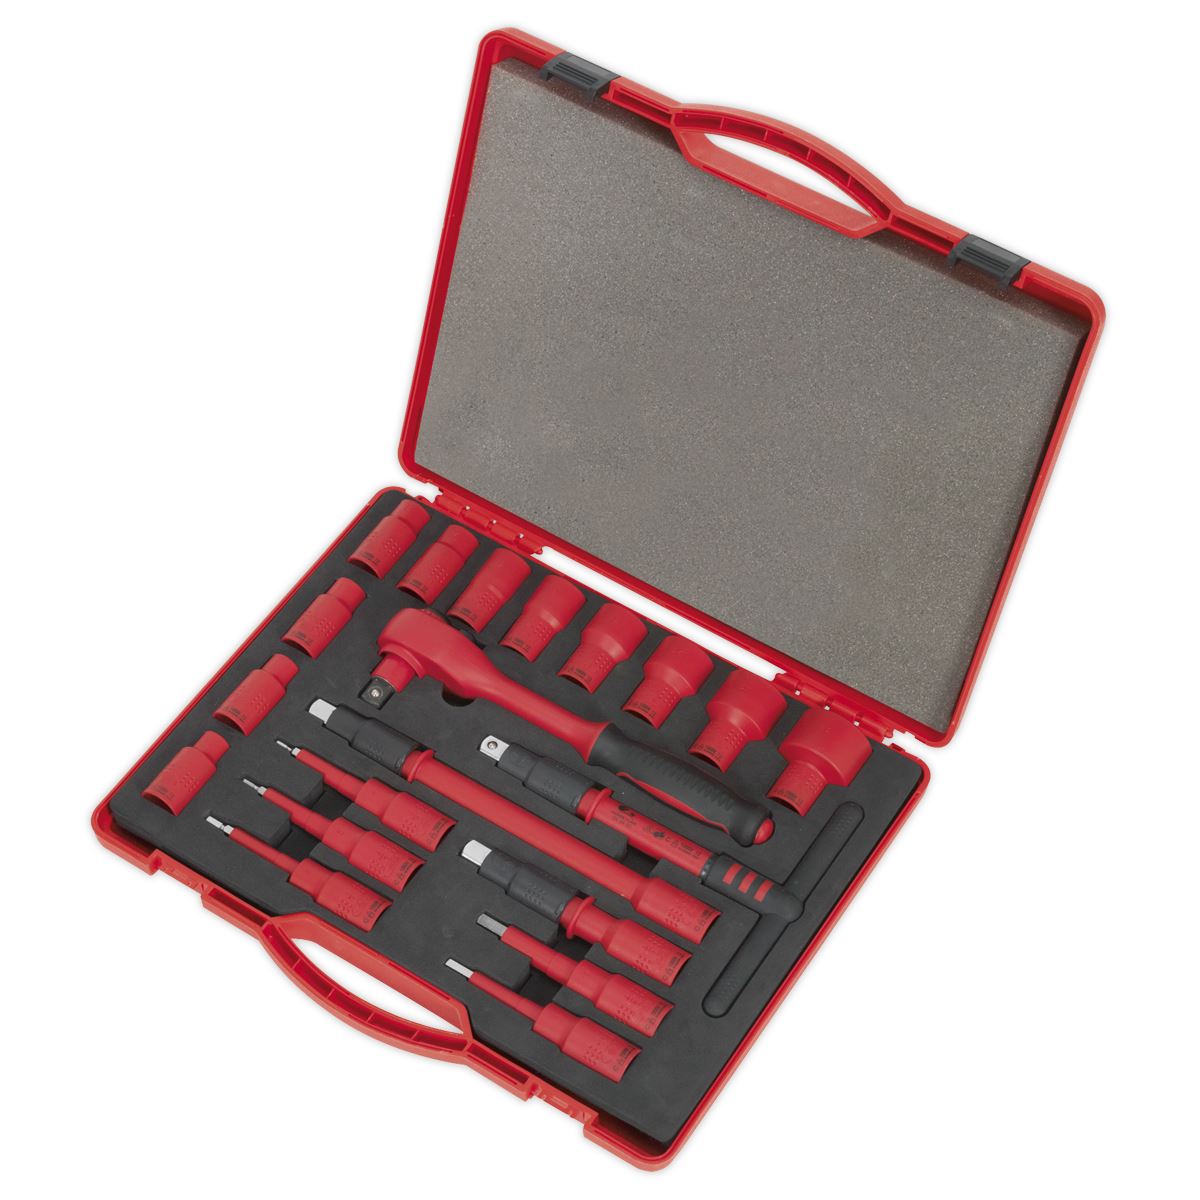 Sealey Premier Insulated Socket Set 20pc 1/2"Sq Drive WallDrive® VDE Approved